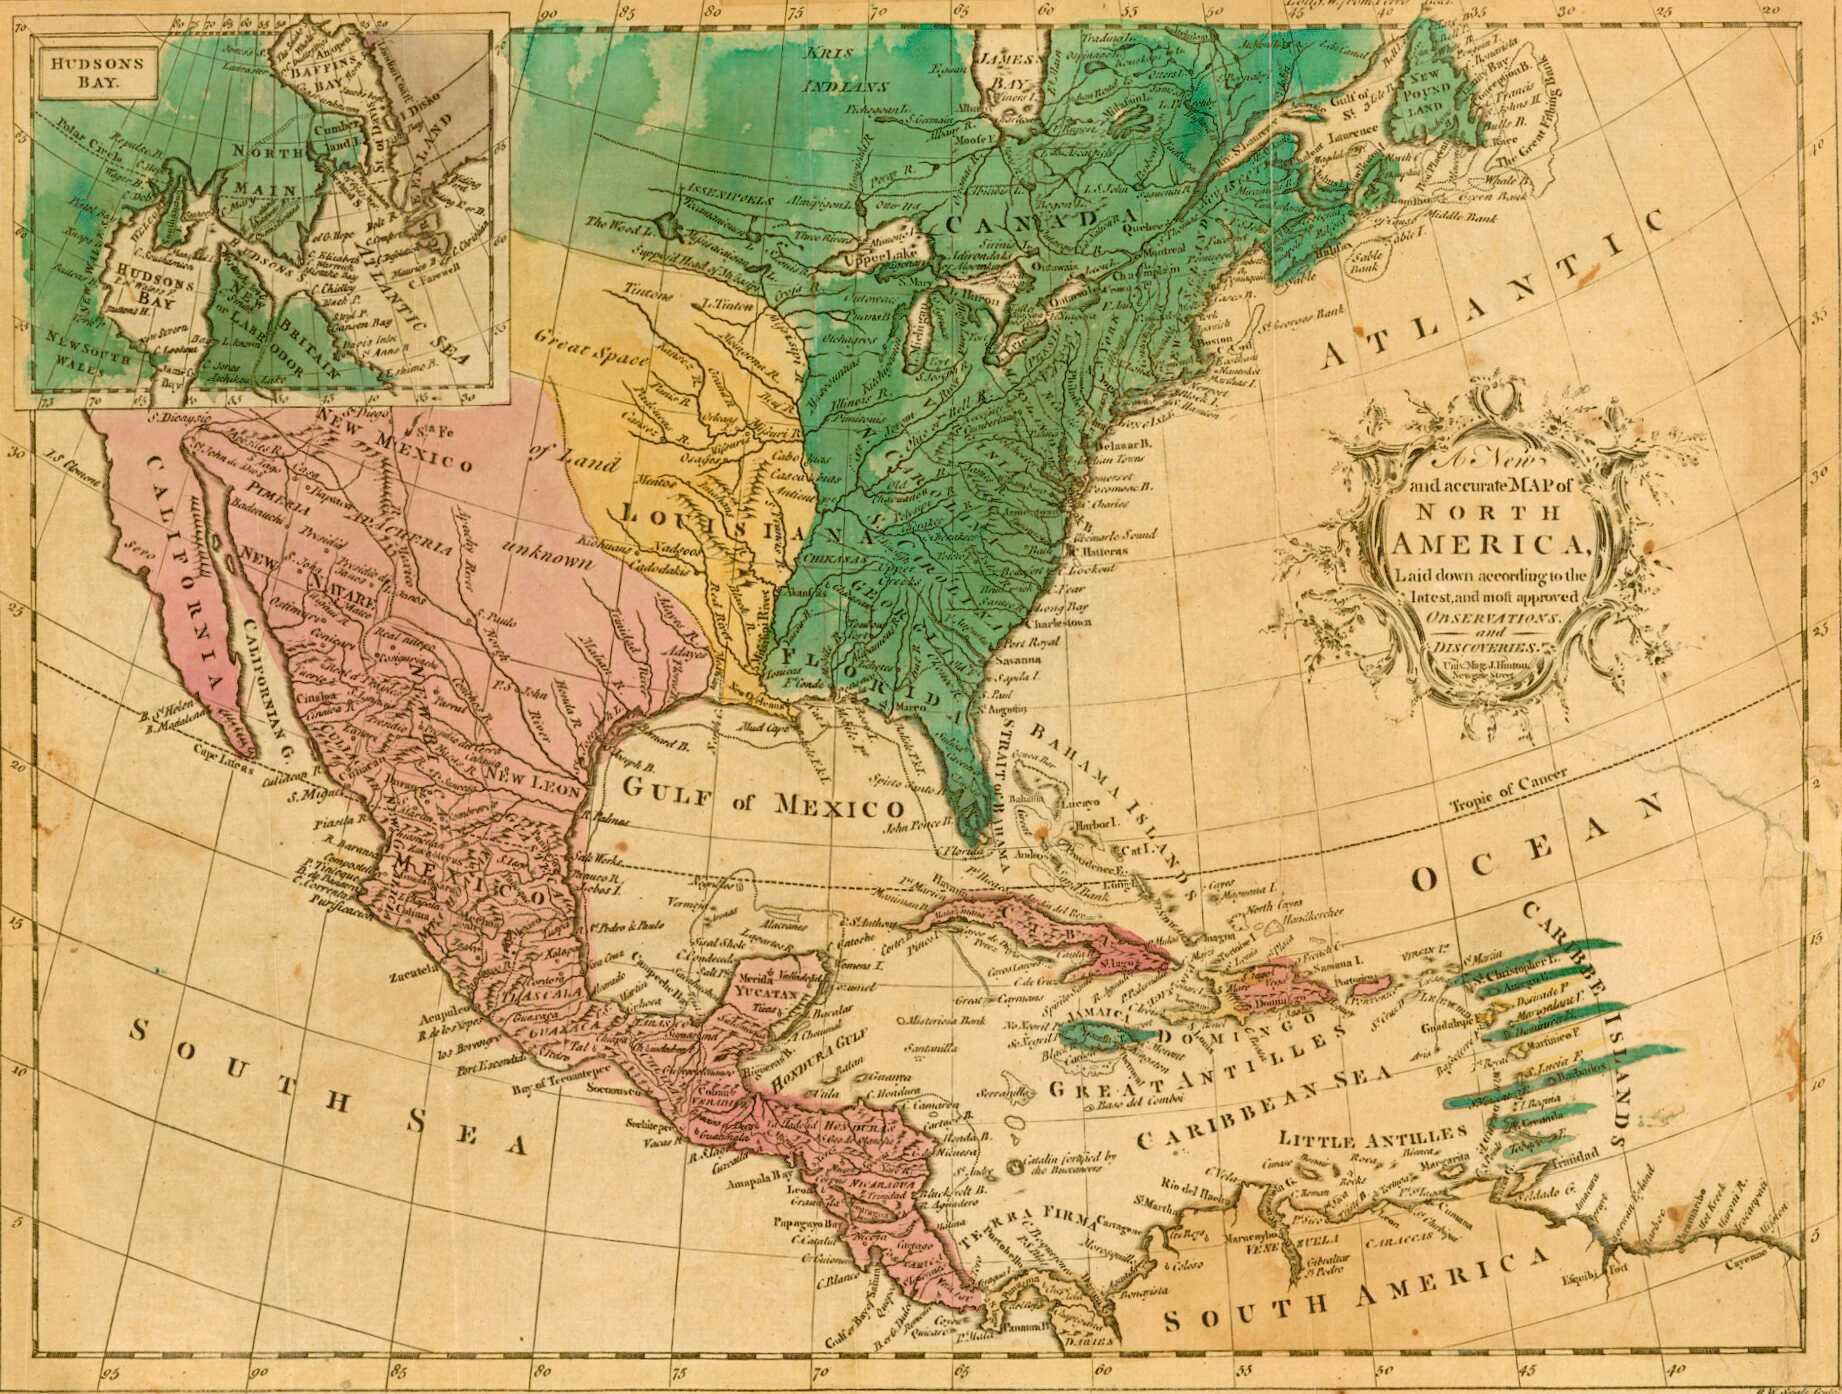 Colorized map of Colonial North America